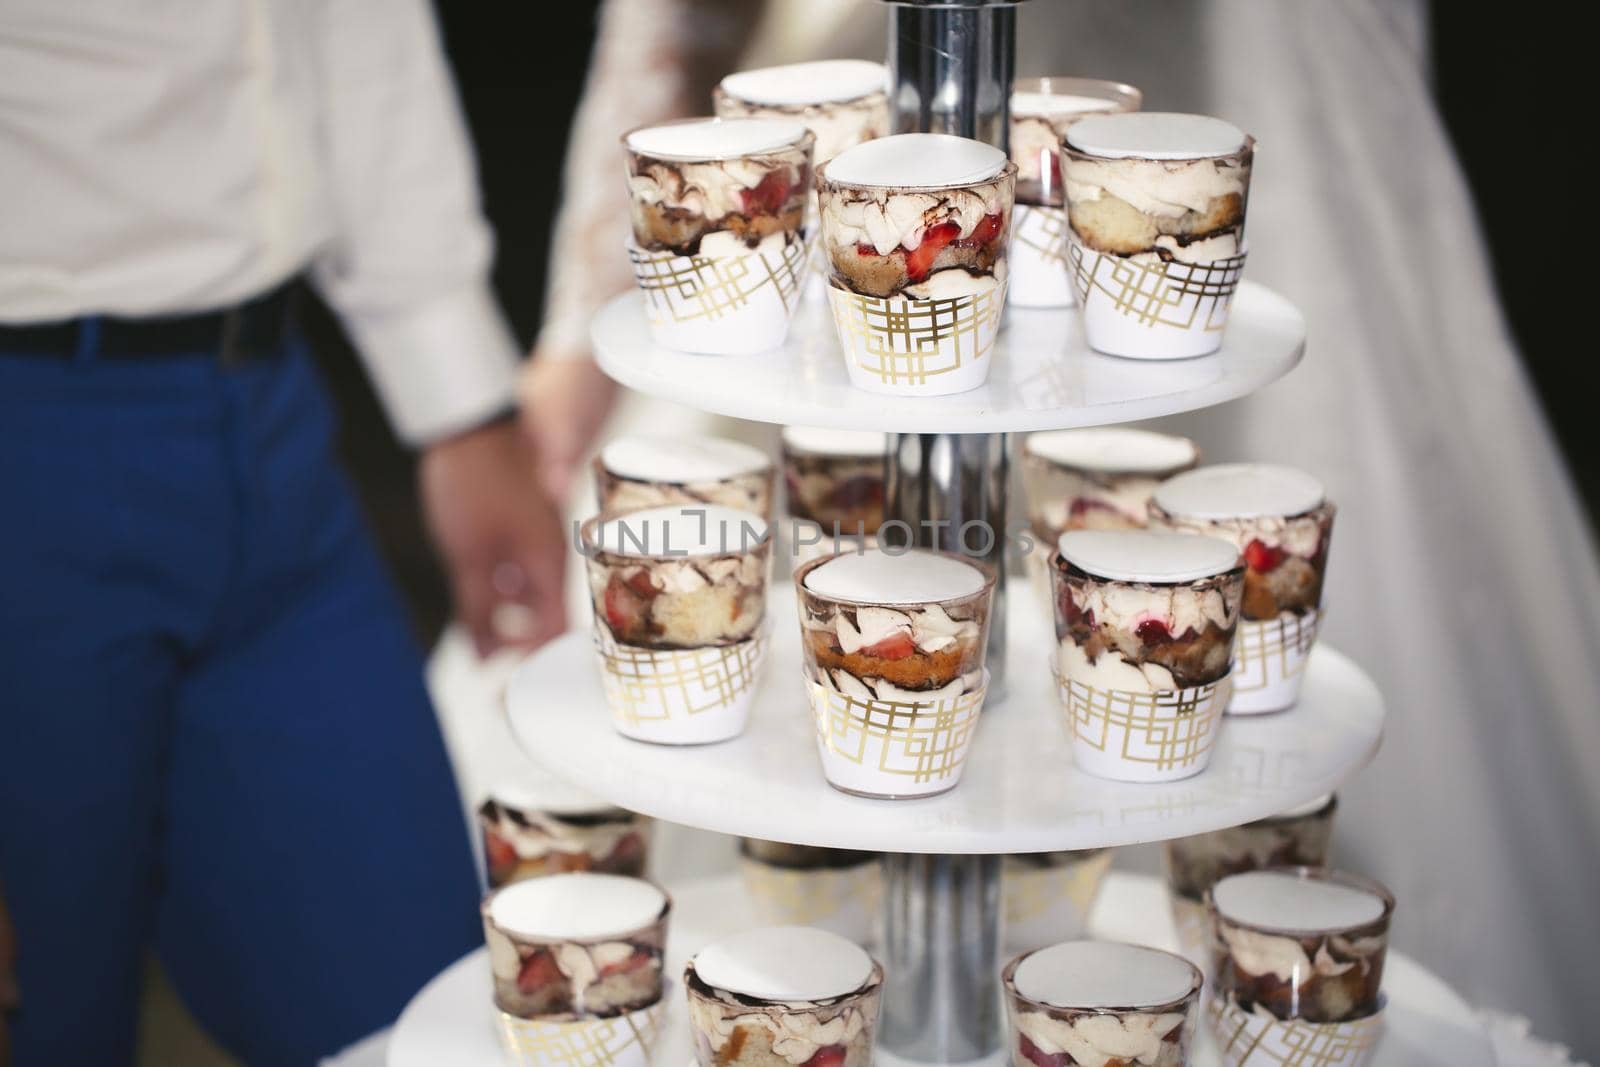 A wedding cake made of trifles on a multi-tiered stand by StudioPeace